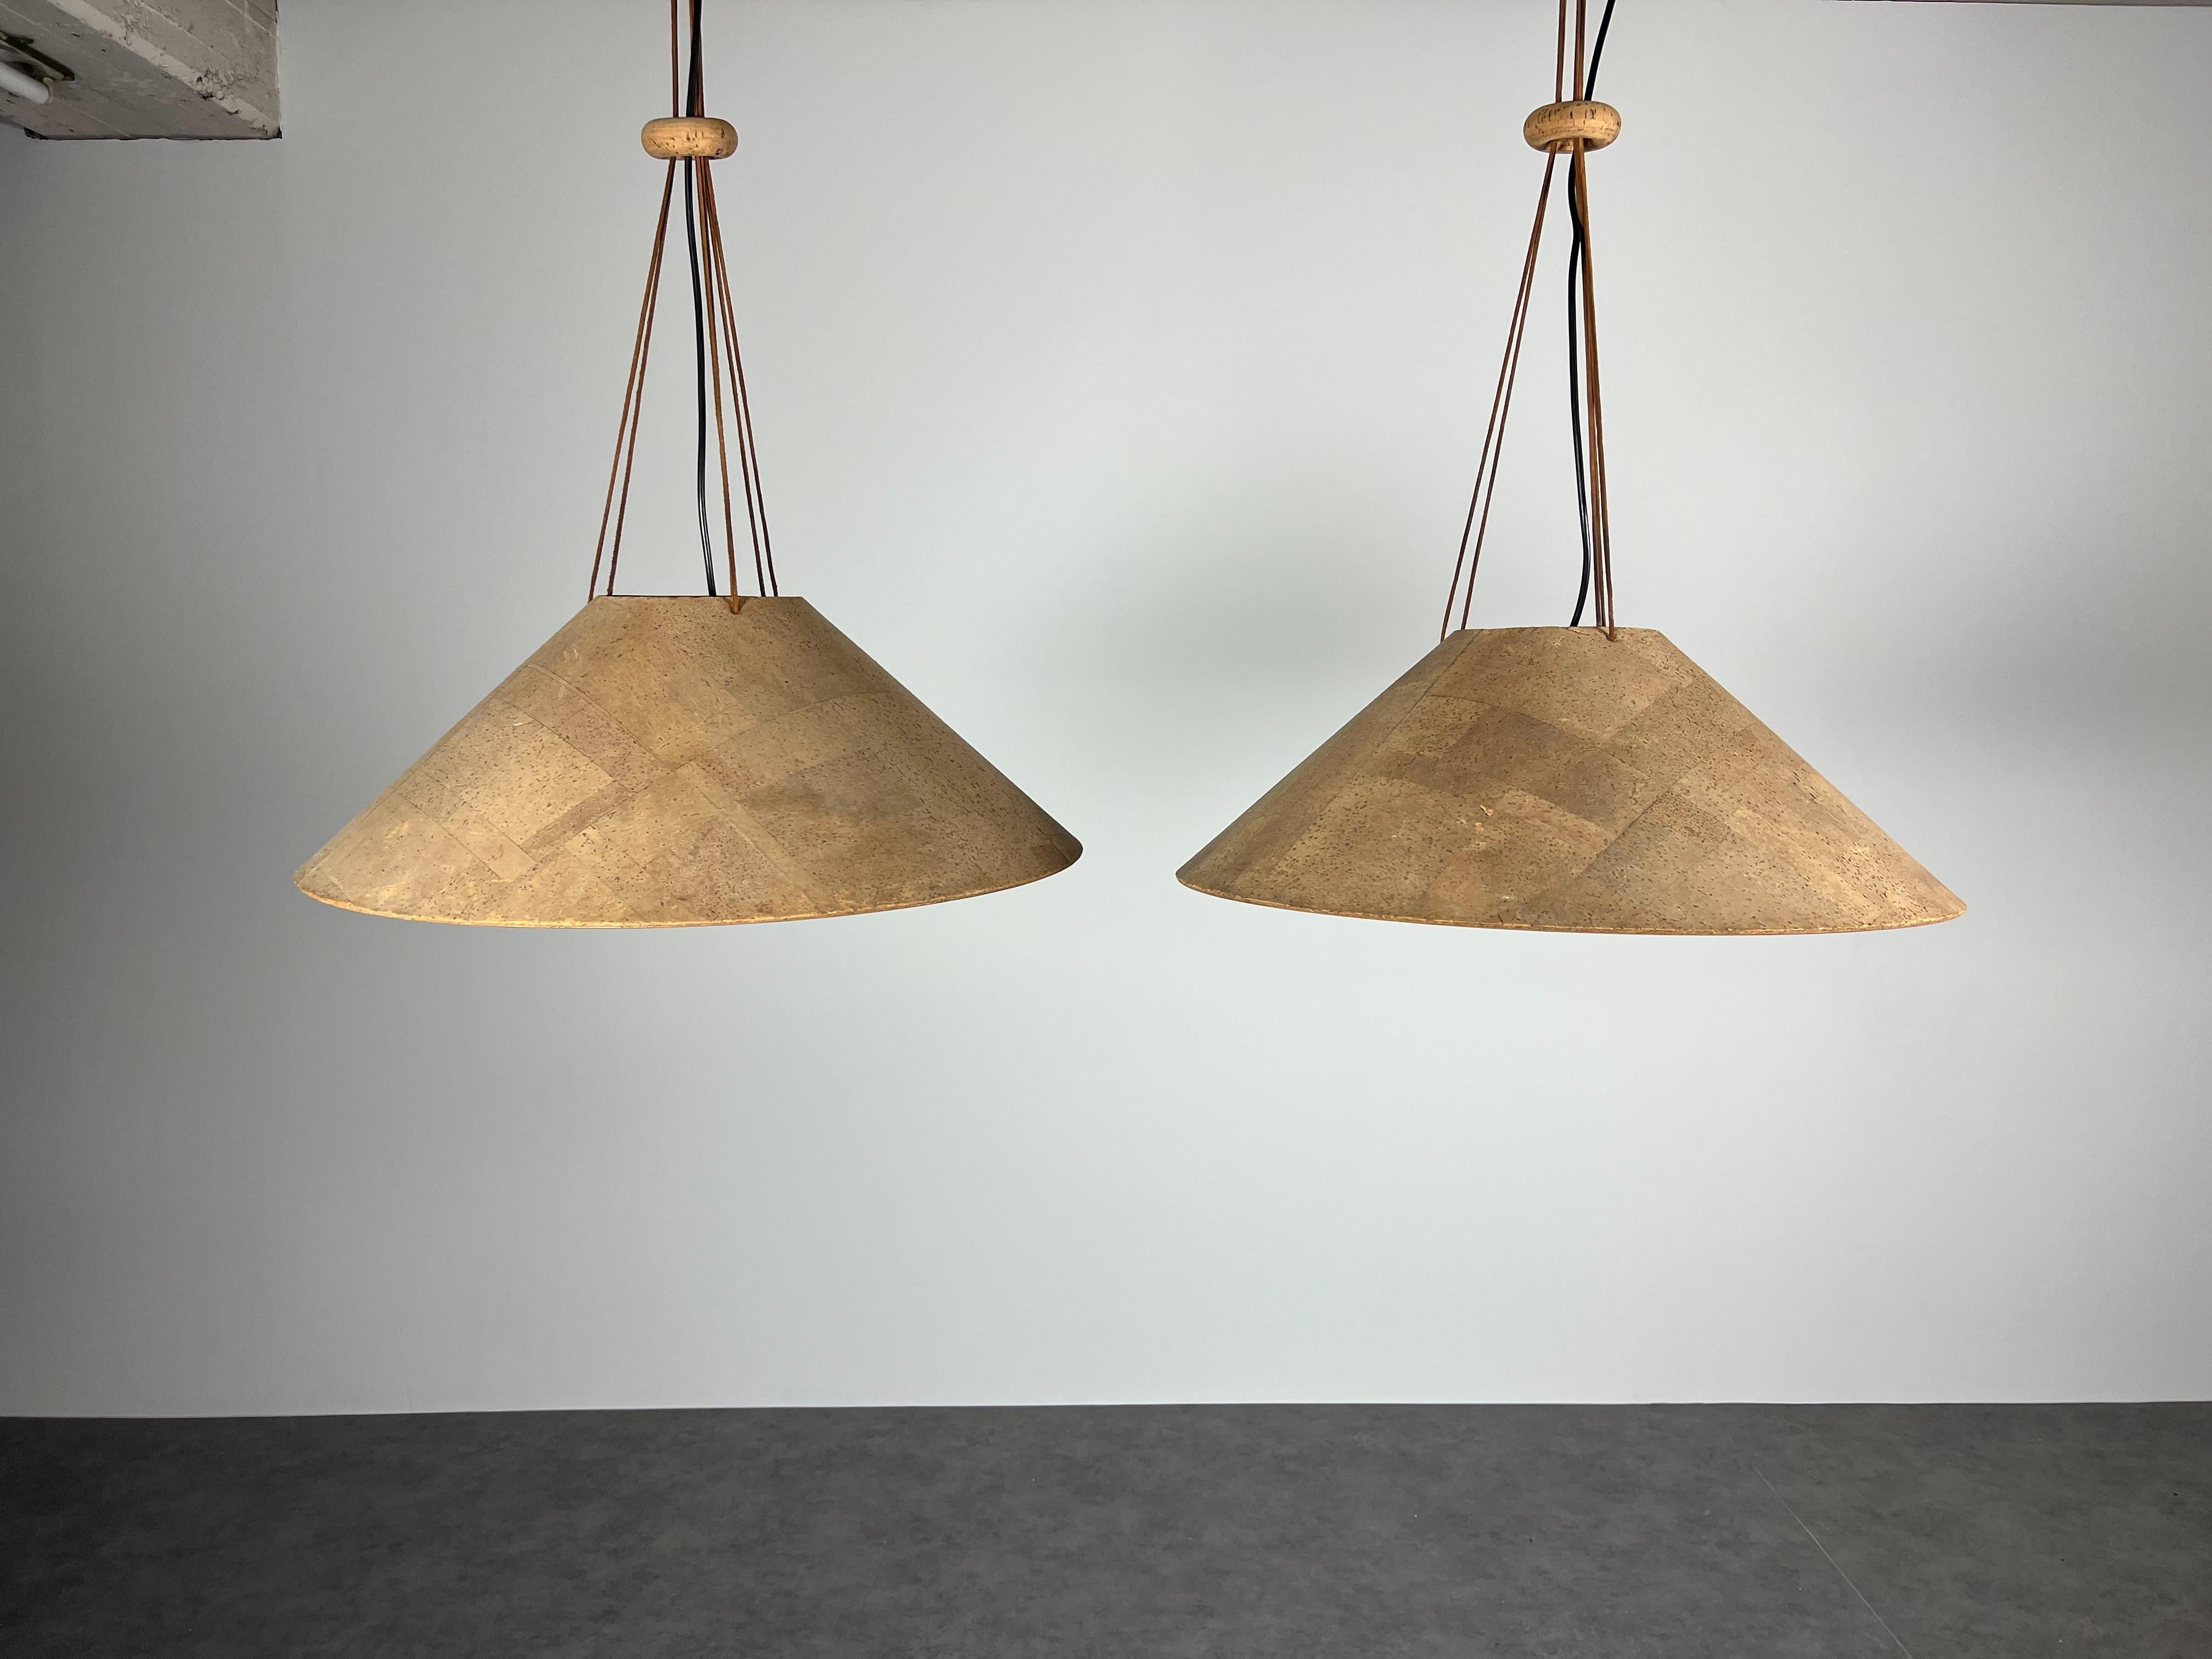 German Rare Set of Two Pendant Lamps Zanotl in Cork by Wilhelm Zannoth for Ingo Maurer